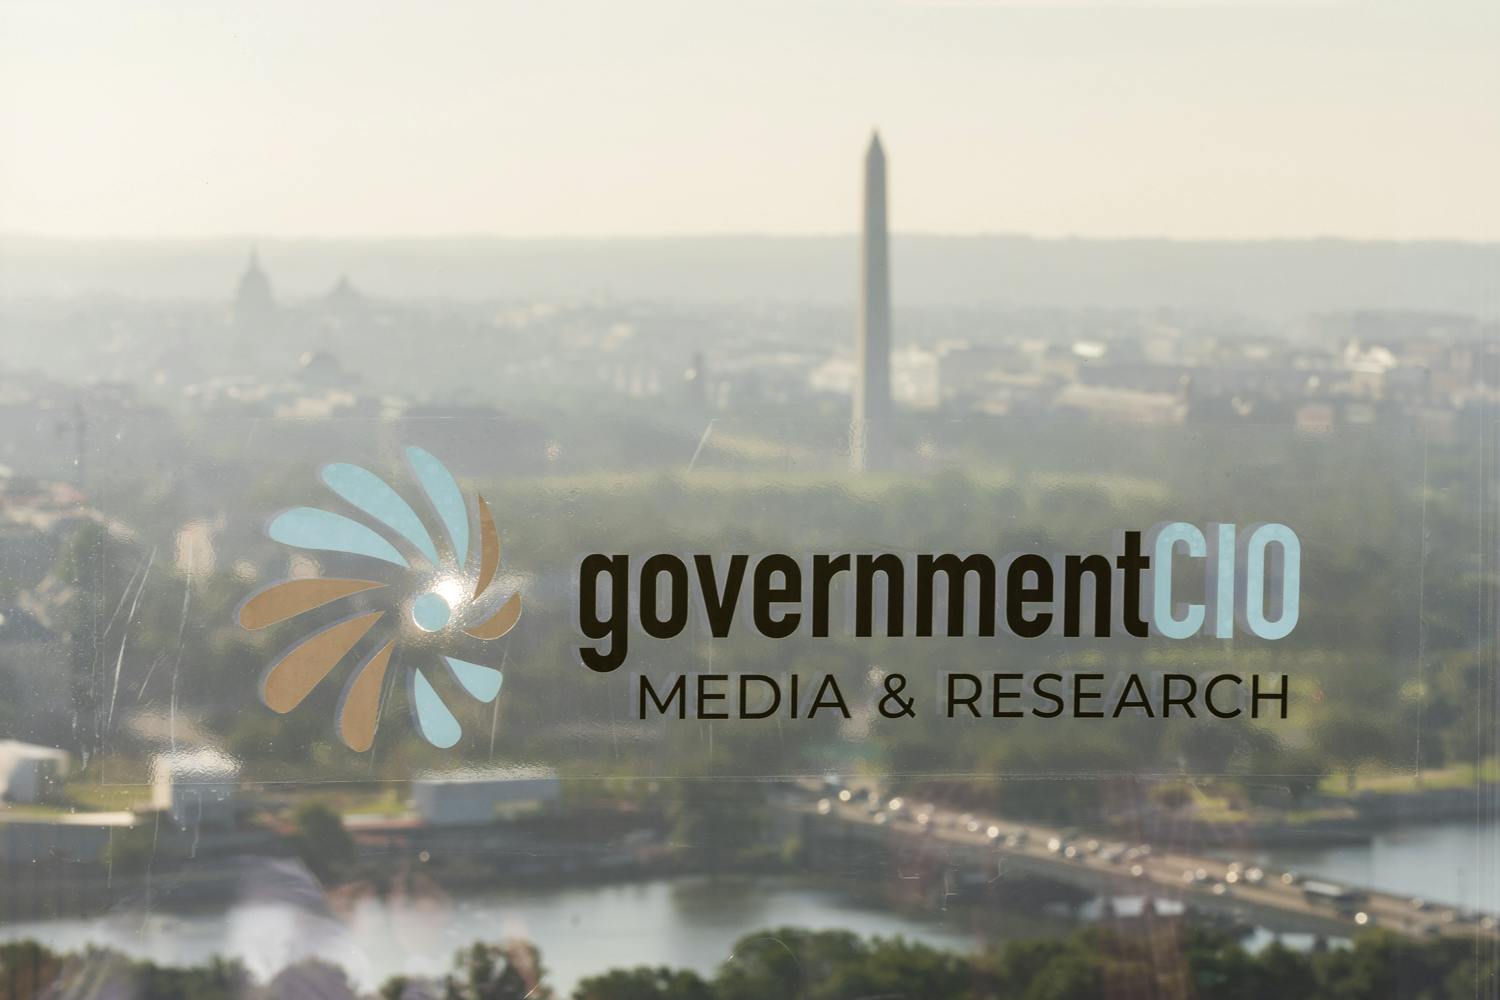 GovernmentCIO Media & Research logo with view of the Washington Monument